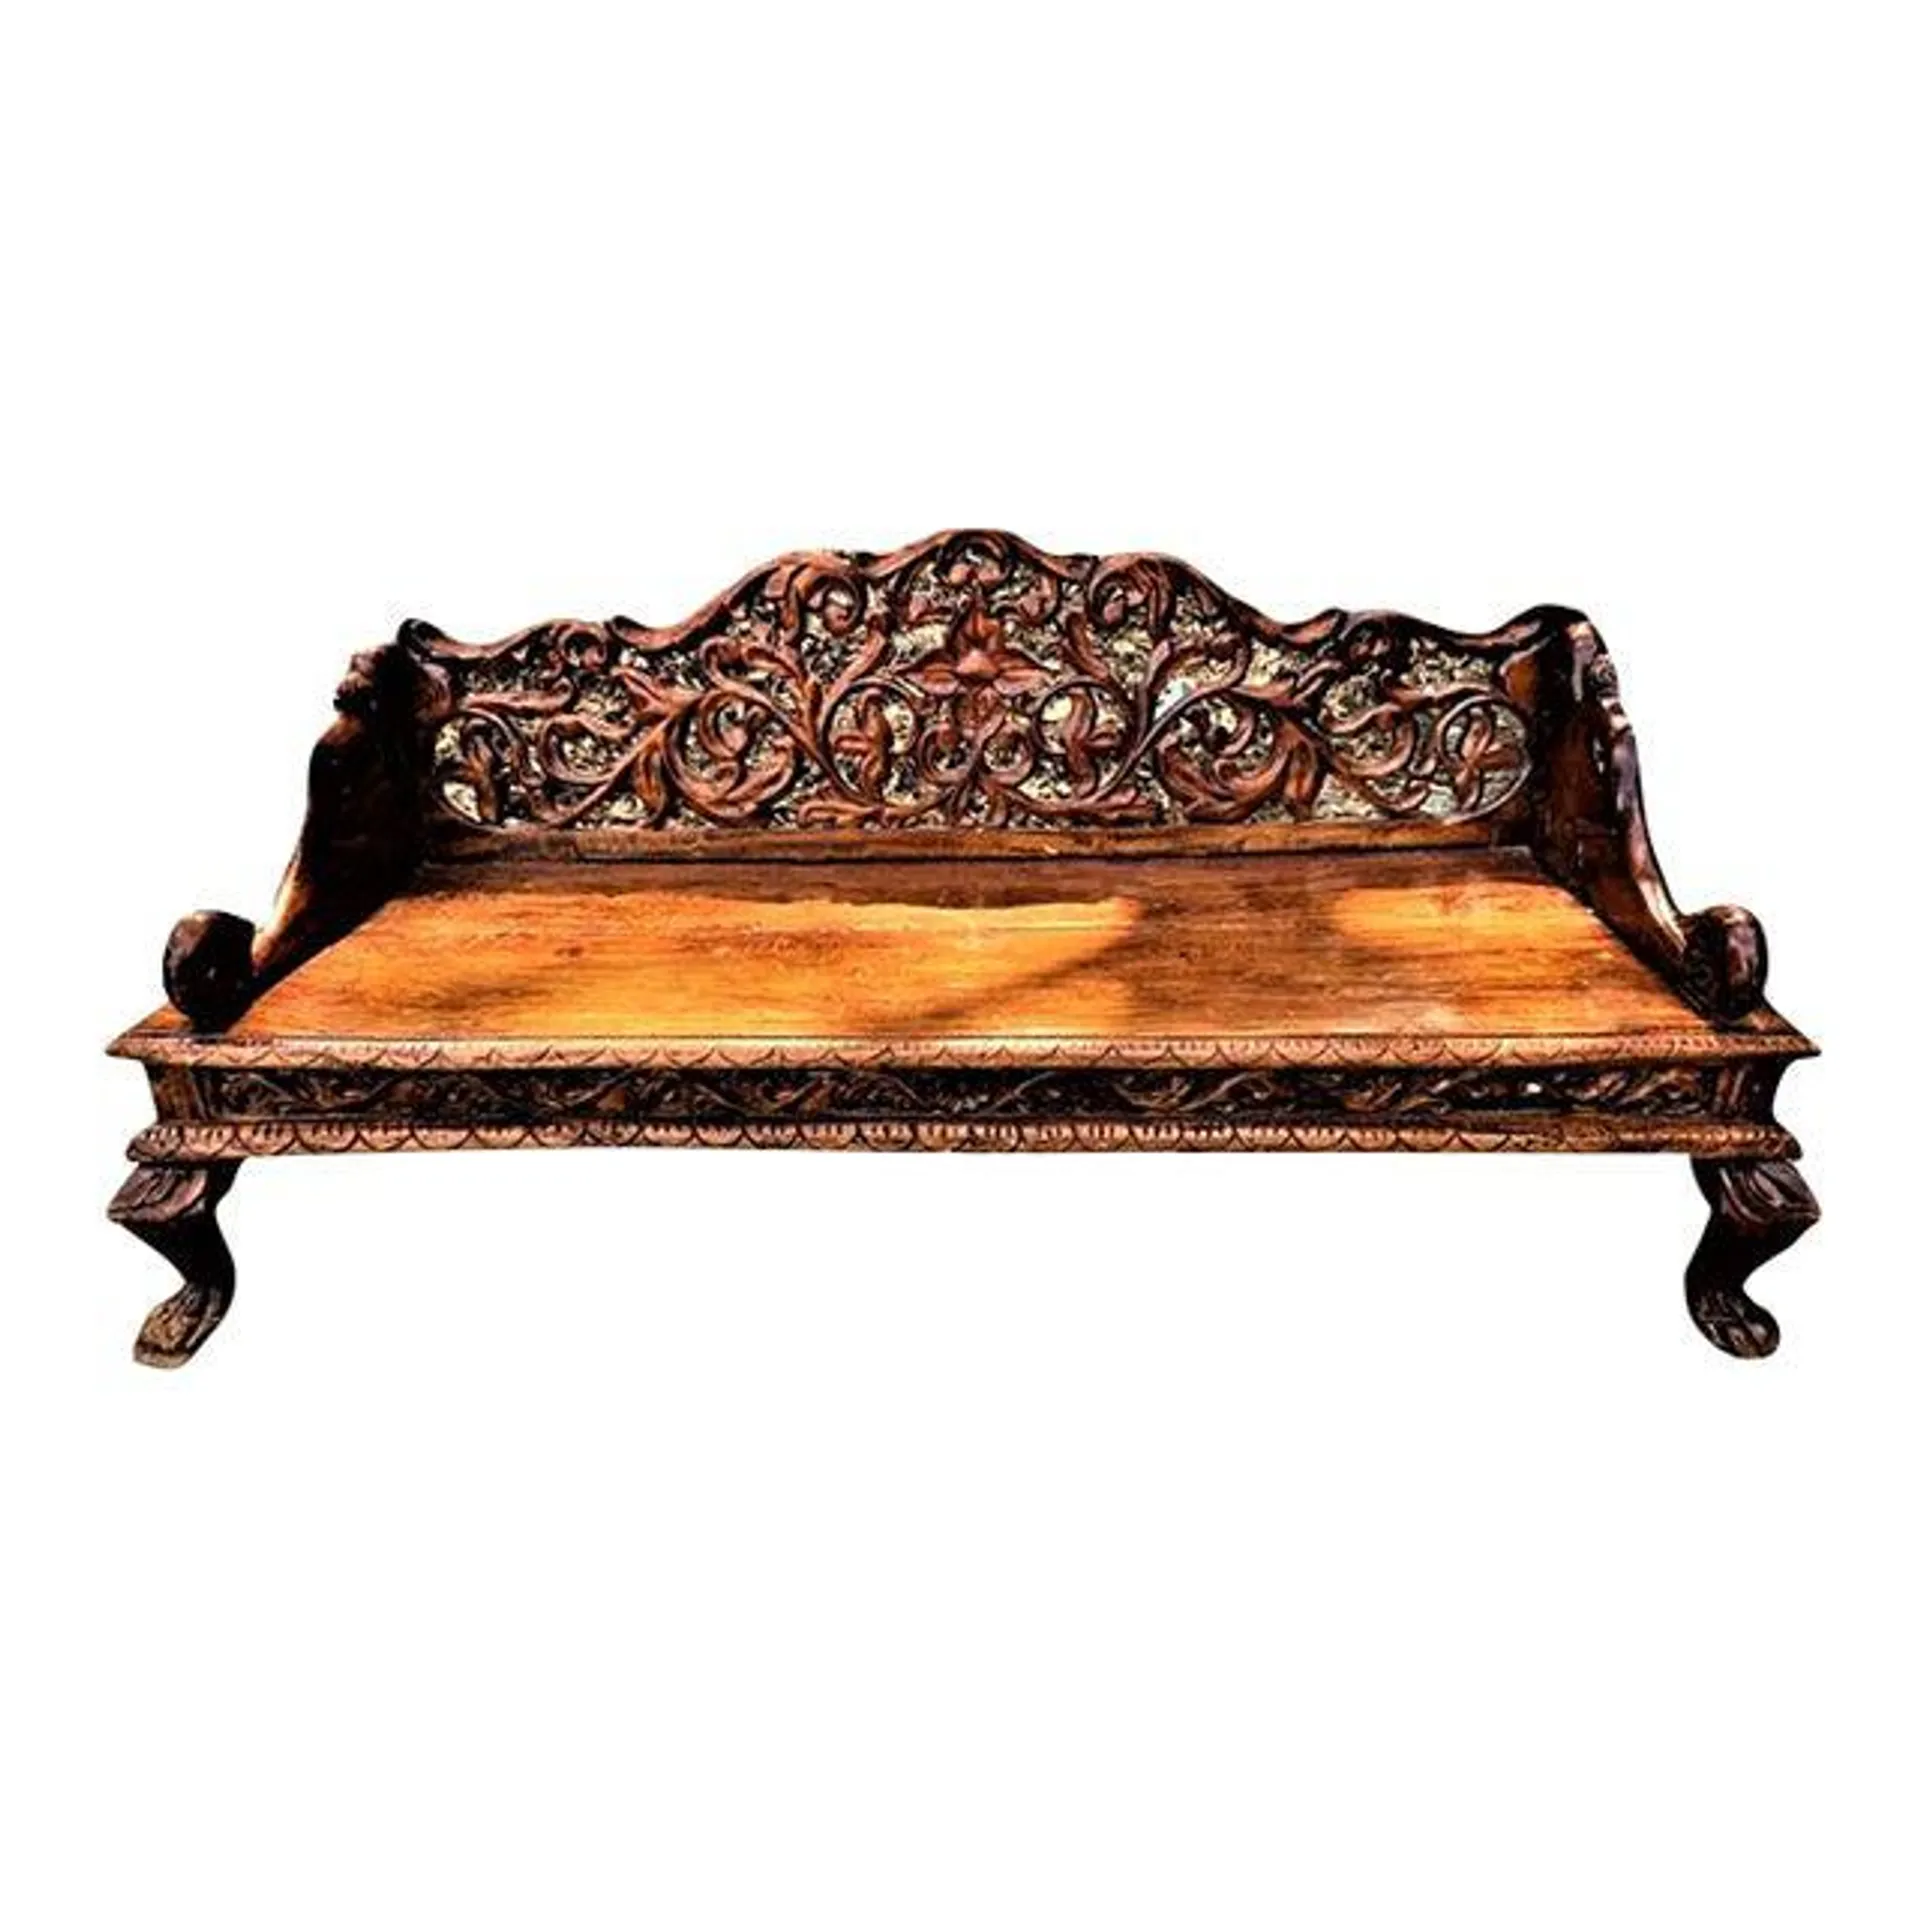 Ornately Carved Teak Bench From South Asia - Mid 20th Century